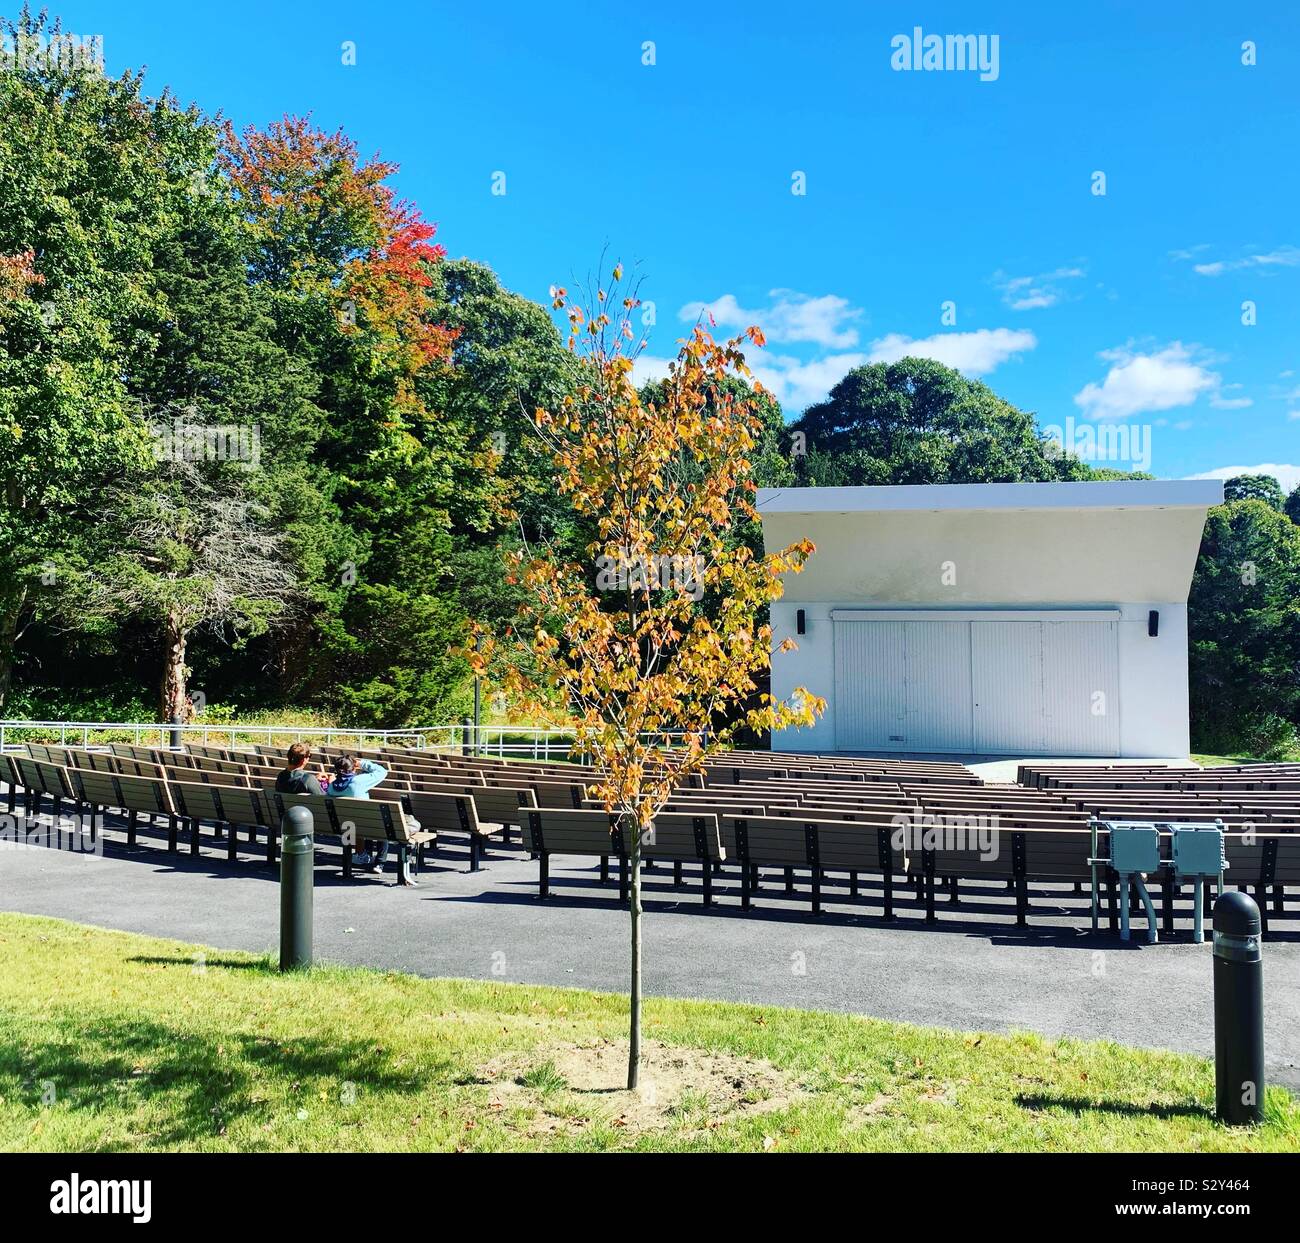 Autumn view of the outdoor amphitheater, Salt Pond Visitor Center, Cape Cod National Seashore, Eastham, Massachusetts, United States. Stock Photo